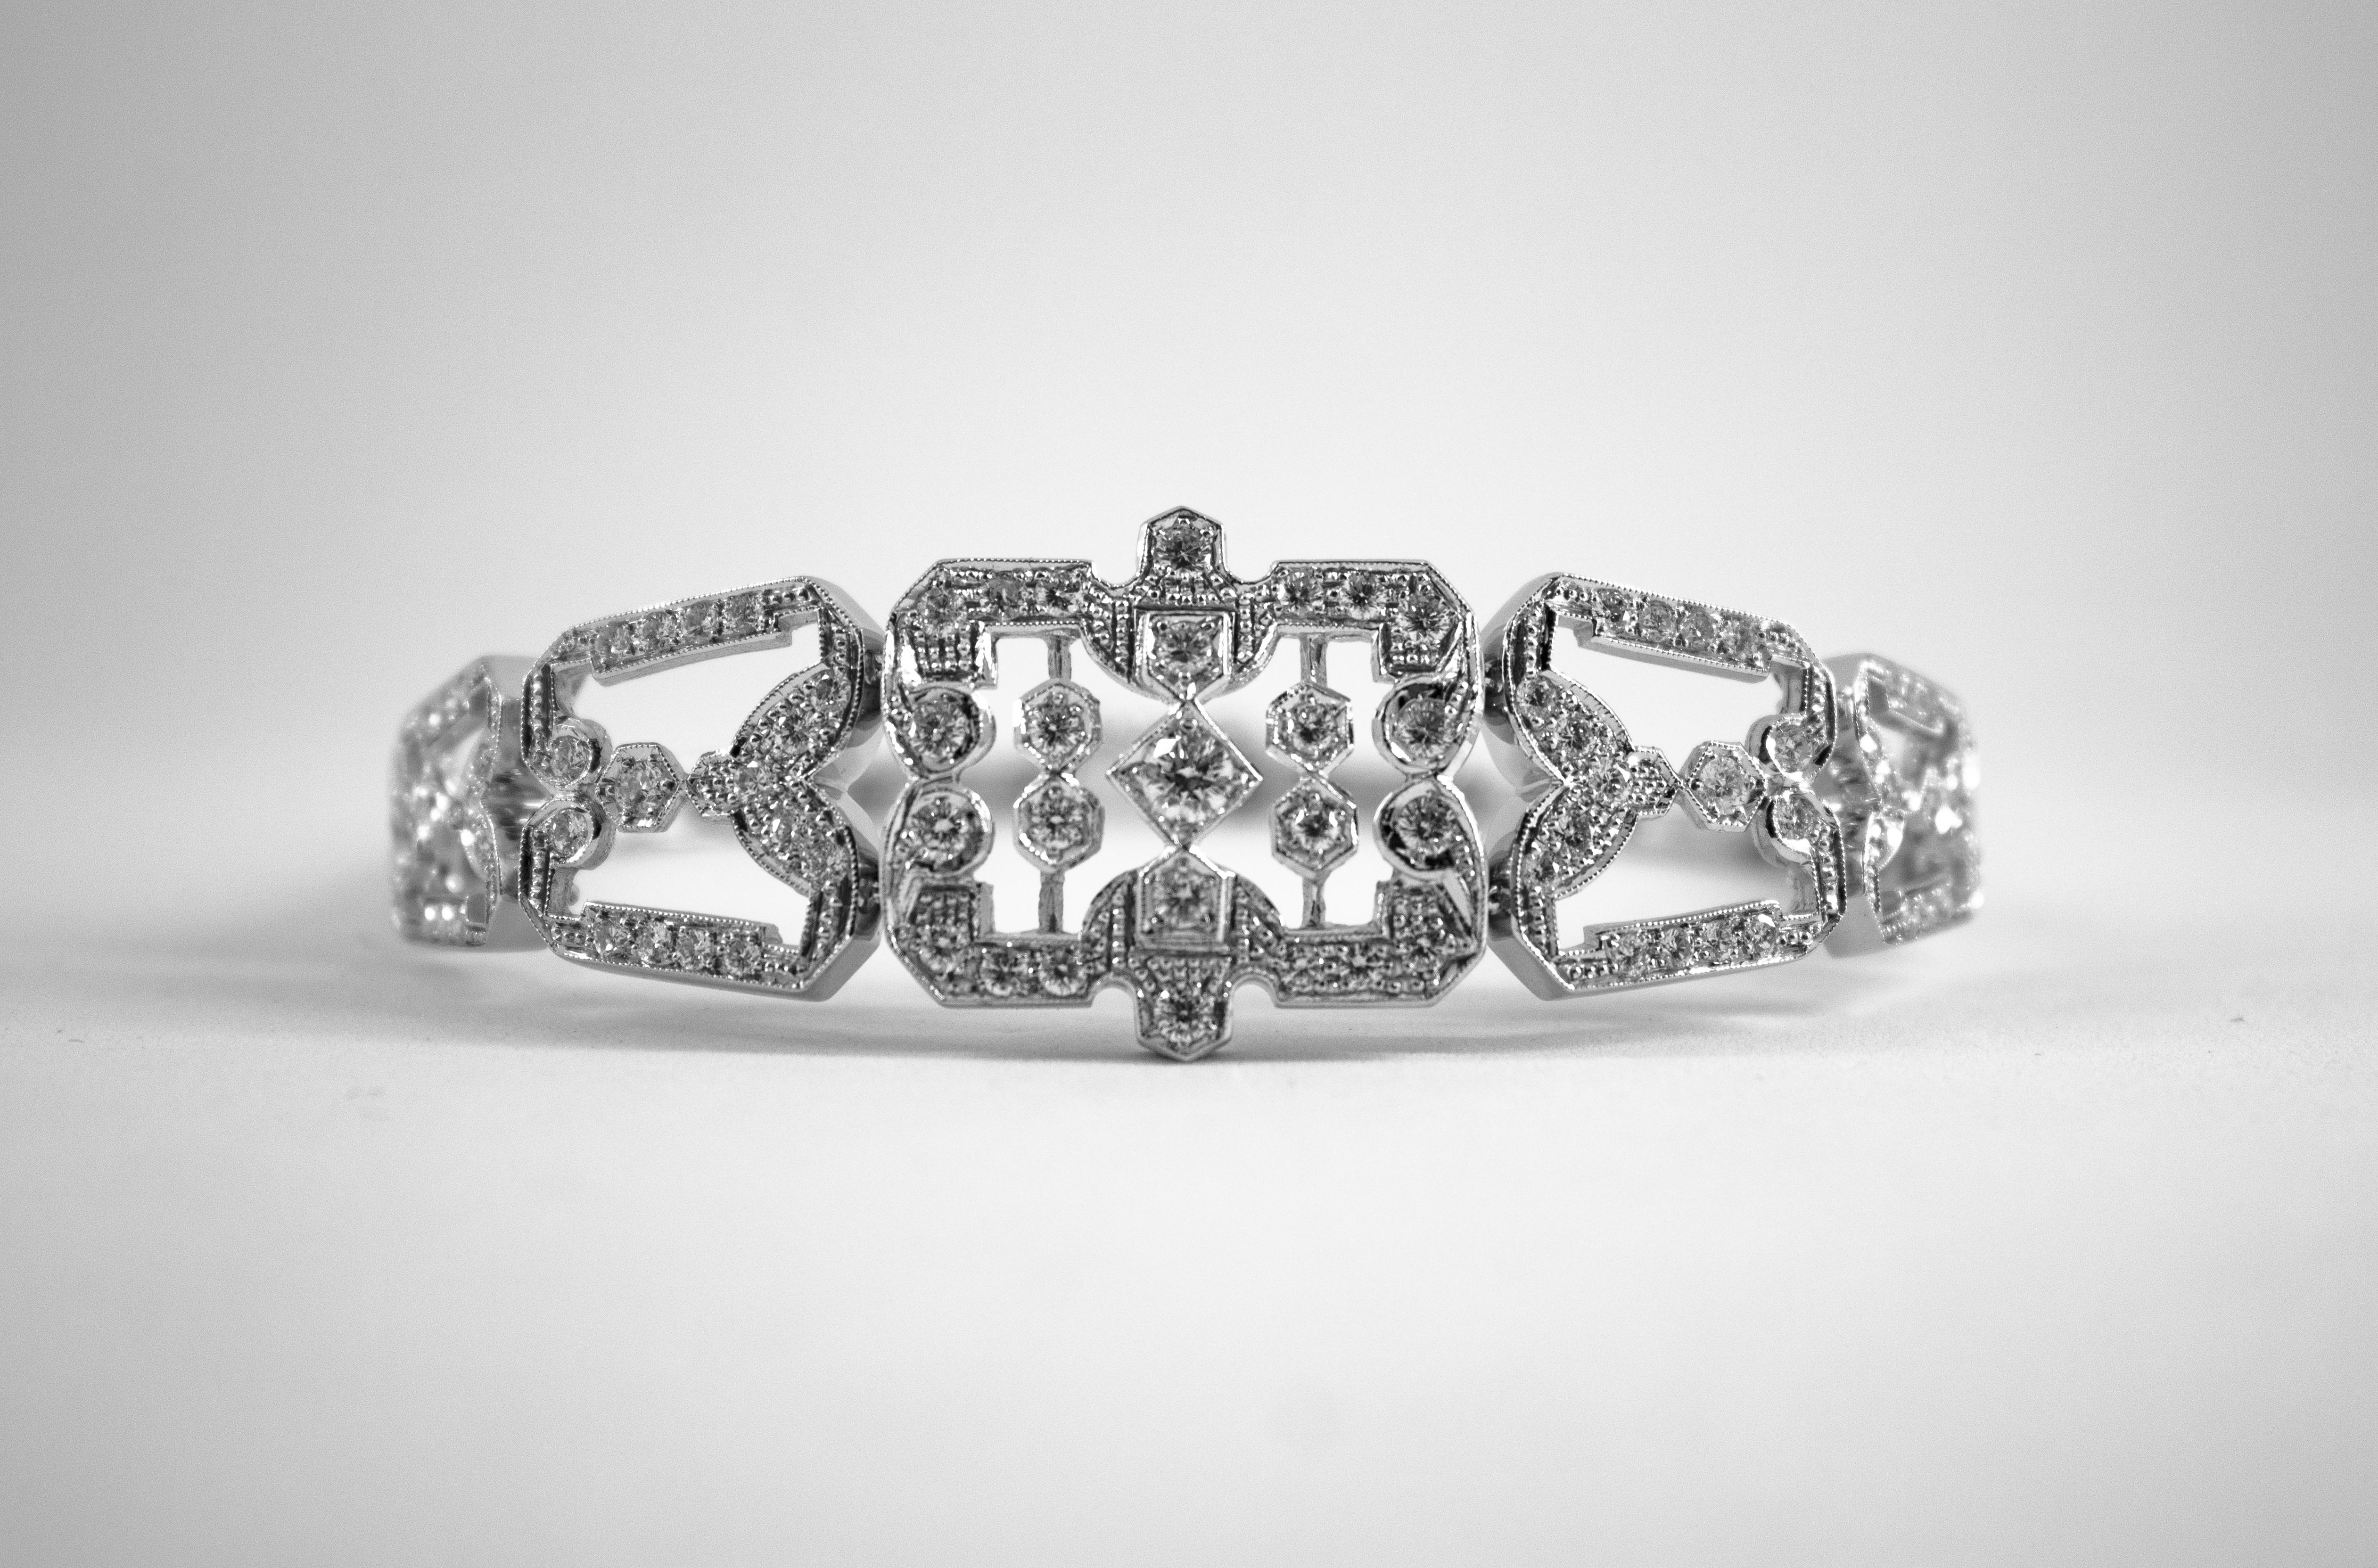 This Bracelet is made of 18K White Gold.
This Bracelet has 2.40 Carats of White Modern Round Cut Diamonds.
This Bracelet is inspired by Art Deco.

We're a workshop so every piece is handmade, customizable and resizable.